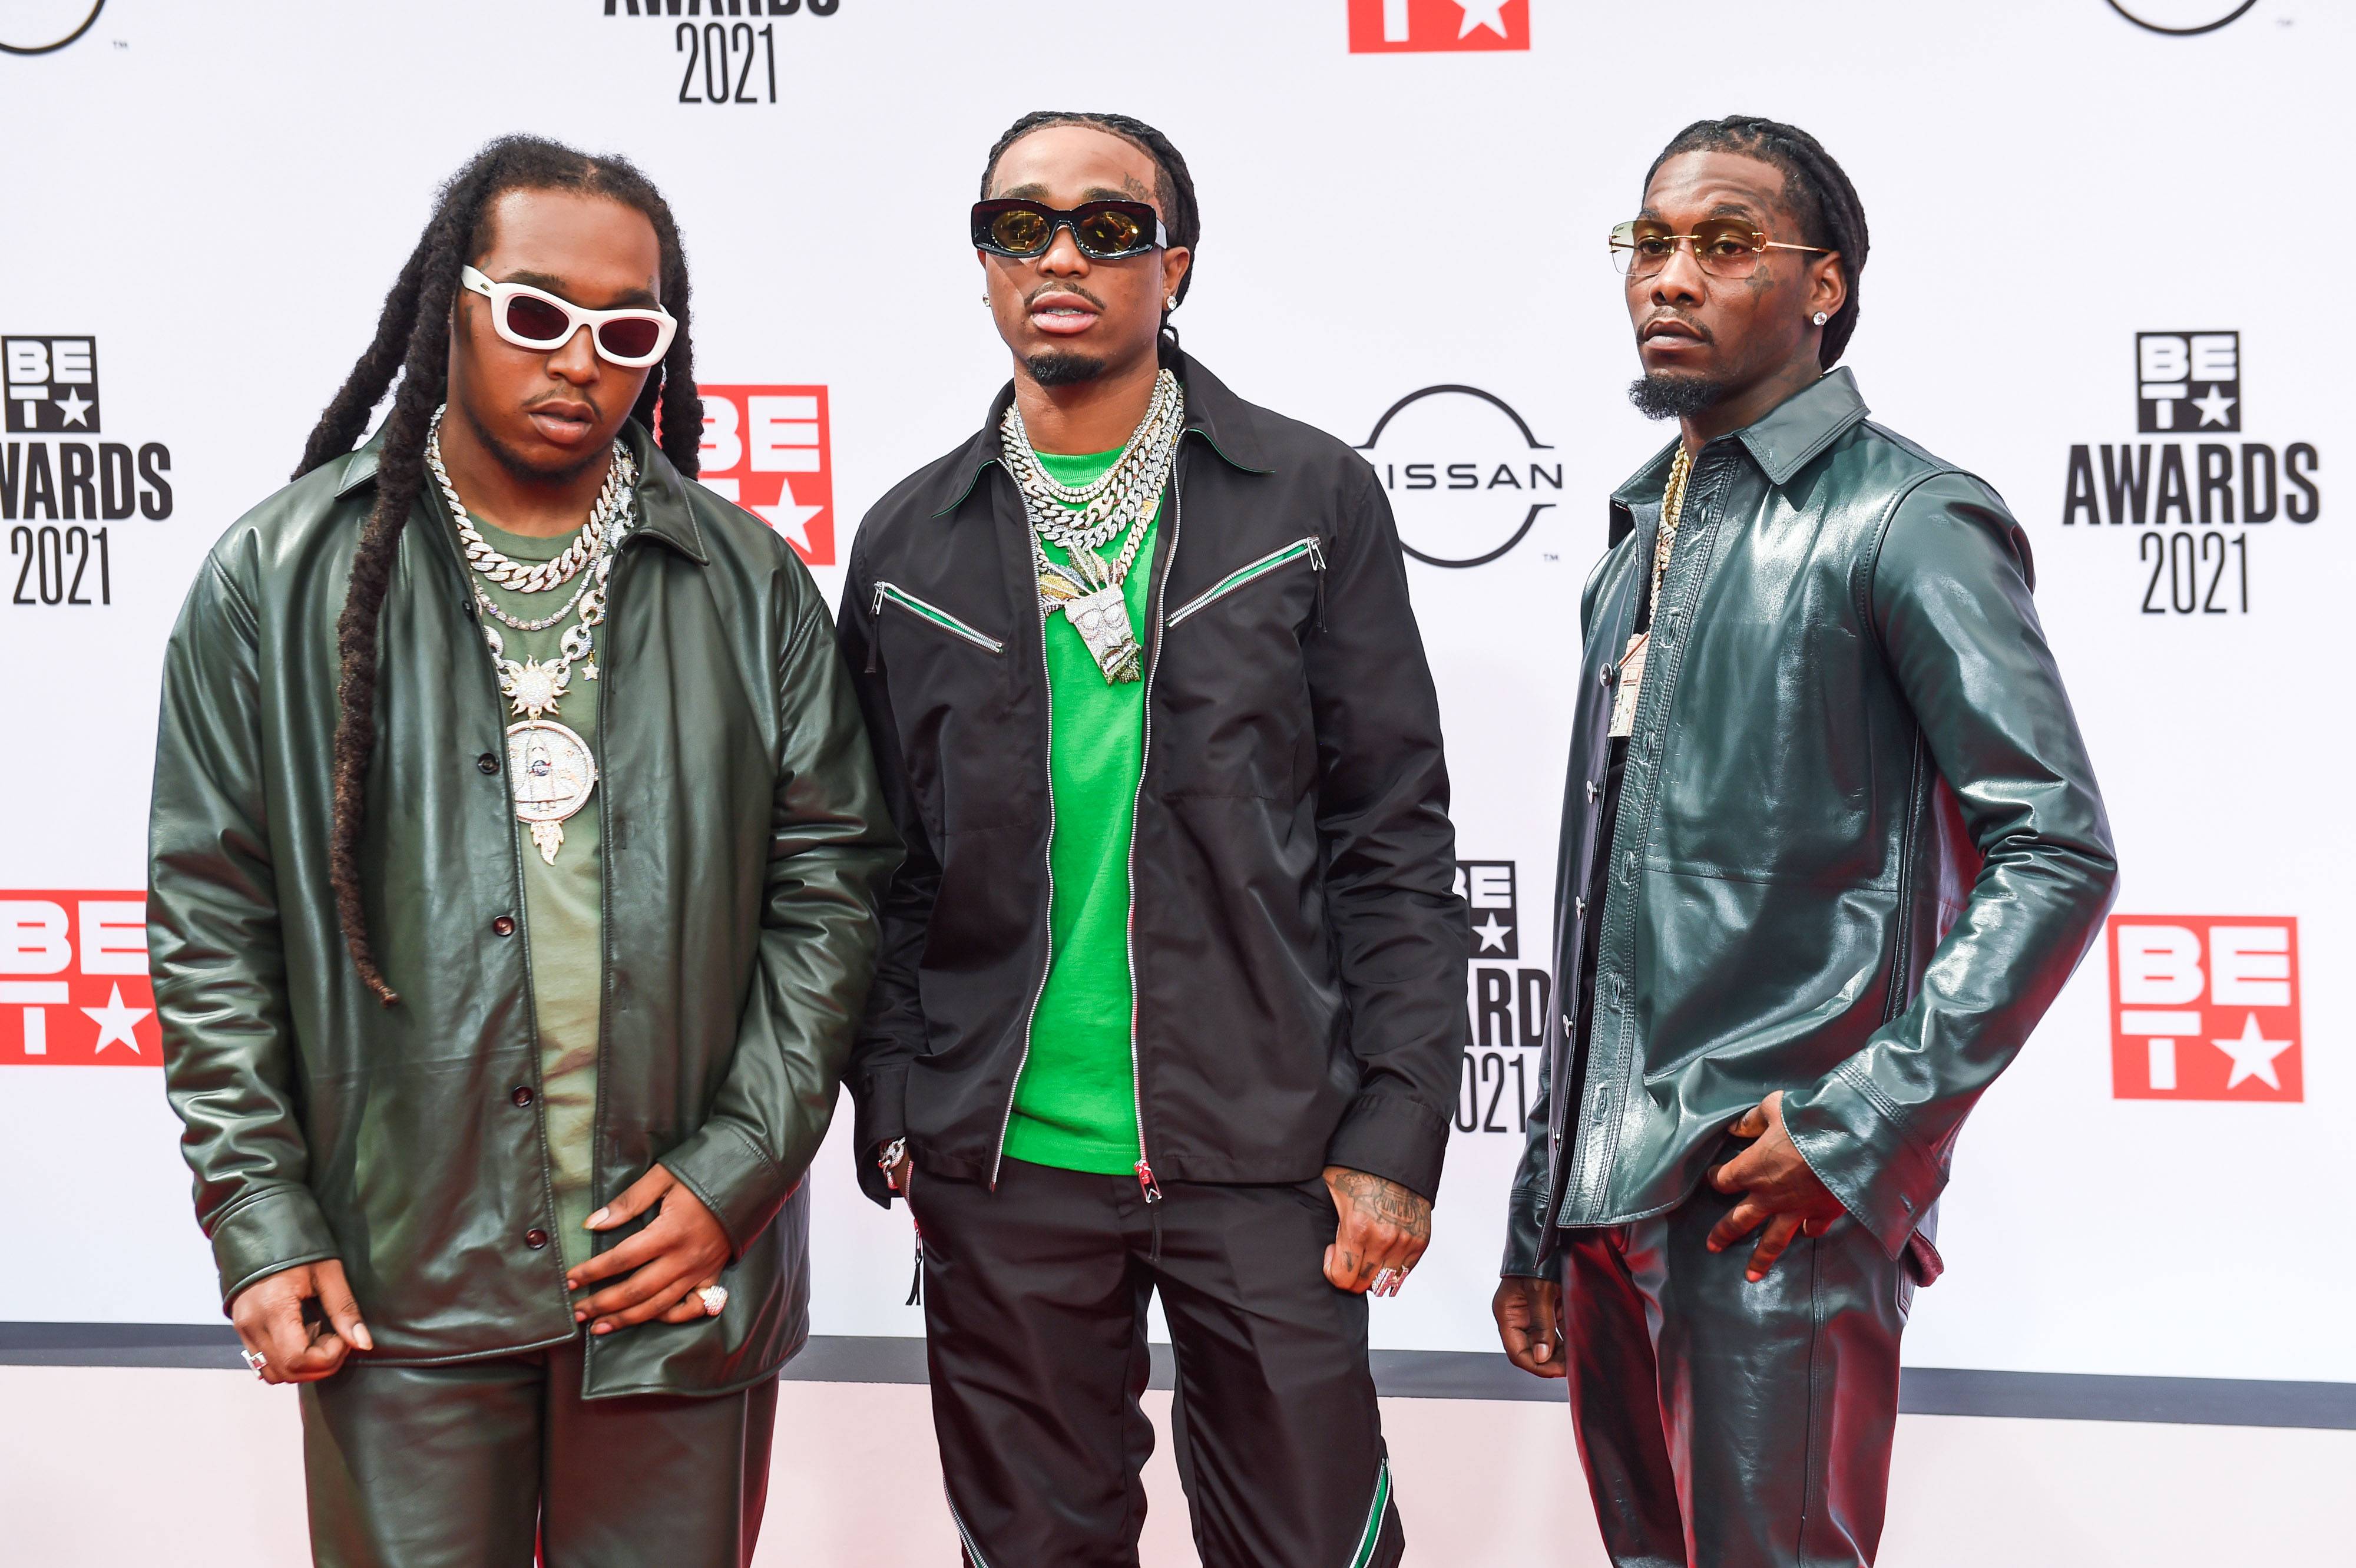 LOS ANGELES, CALIFORNIA - JUNE 27: Recording Artists (L-R) Takeoff, Quavo and Offset of Migos attend the 2021 BET Awards at the Microsoft Theater on June 27, 2021 in Los Angeles, California. (Photo by Aaron J. Thornton/Getty Images)